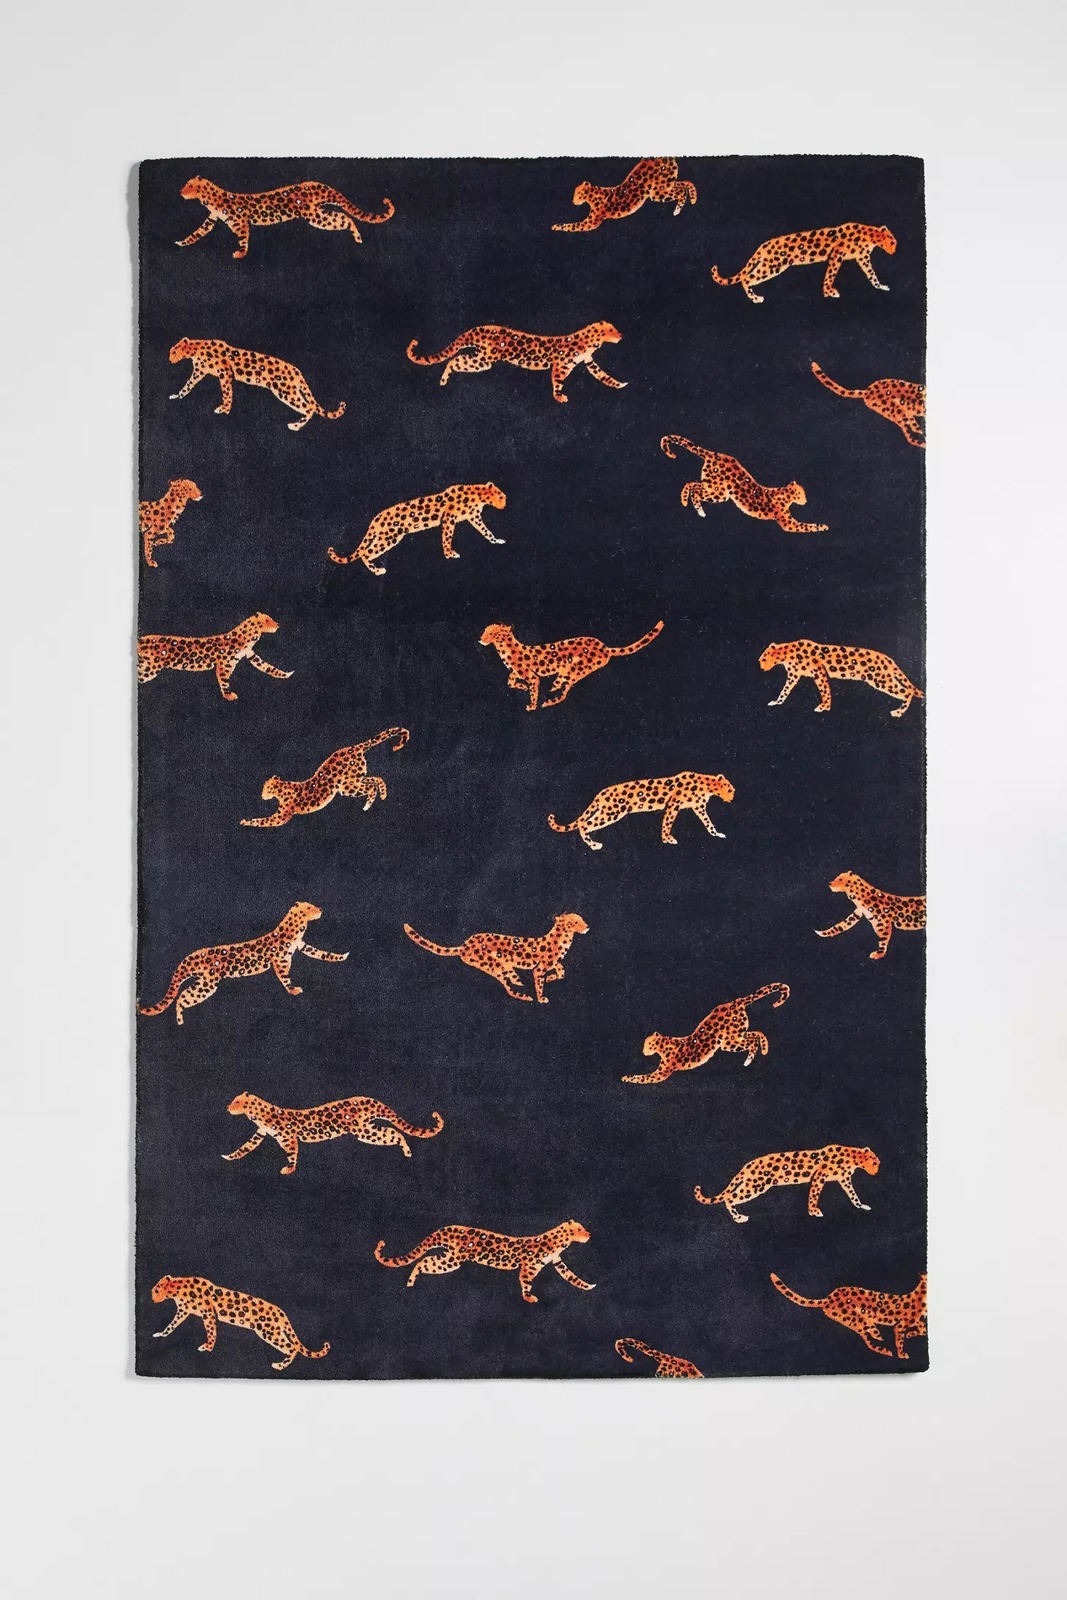 Primary image for Area Rugs 10' x 14' Cheetah Black Hand Tufted Anthropologie Soft Woolen Carpet